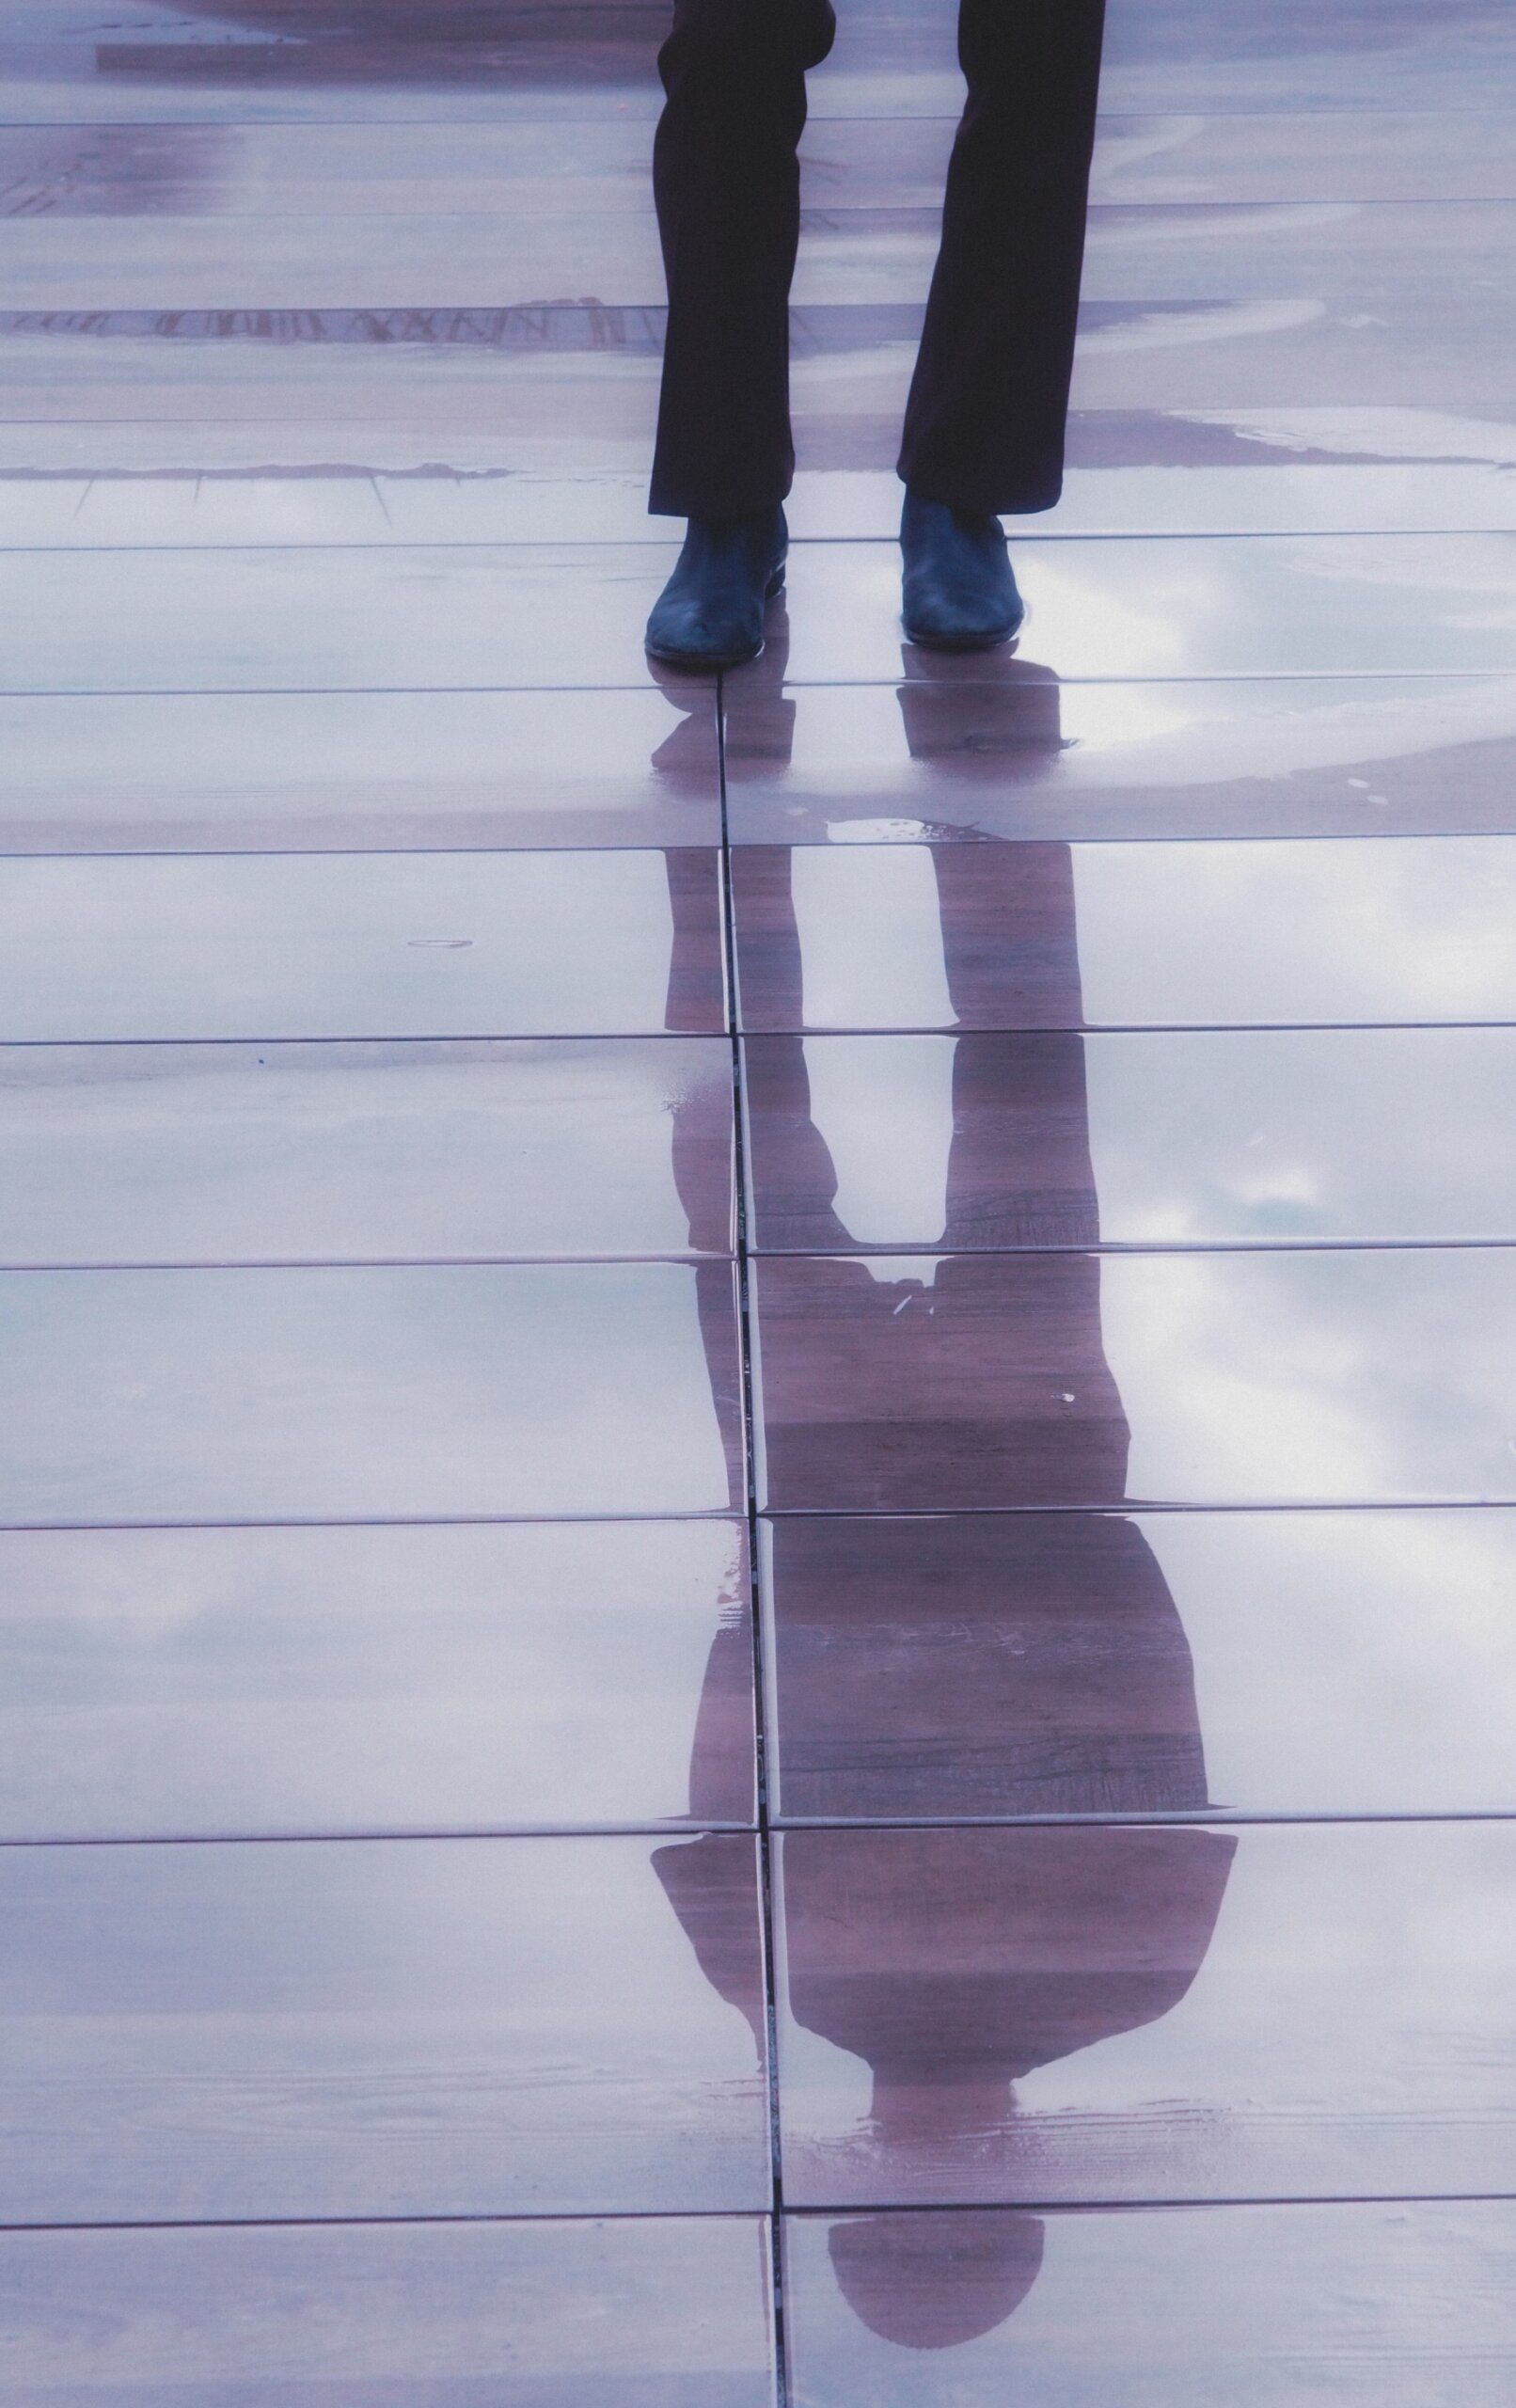 feet on a rainy surface that is reflecting the rest of the body